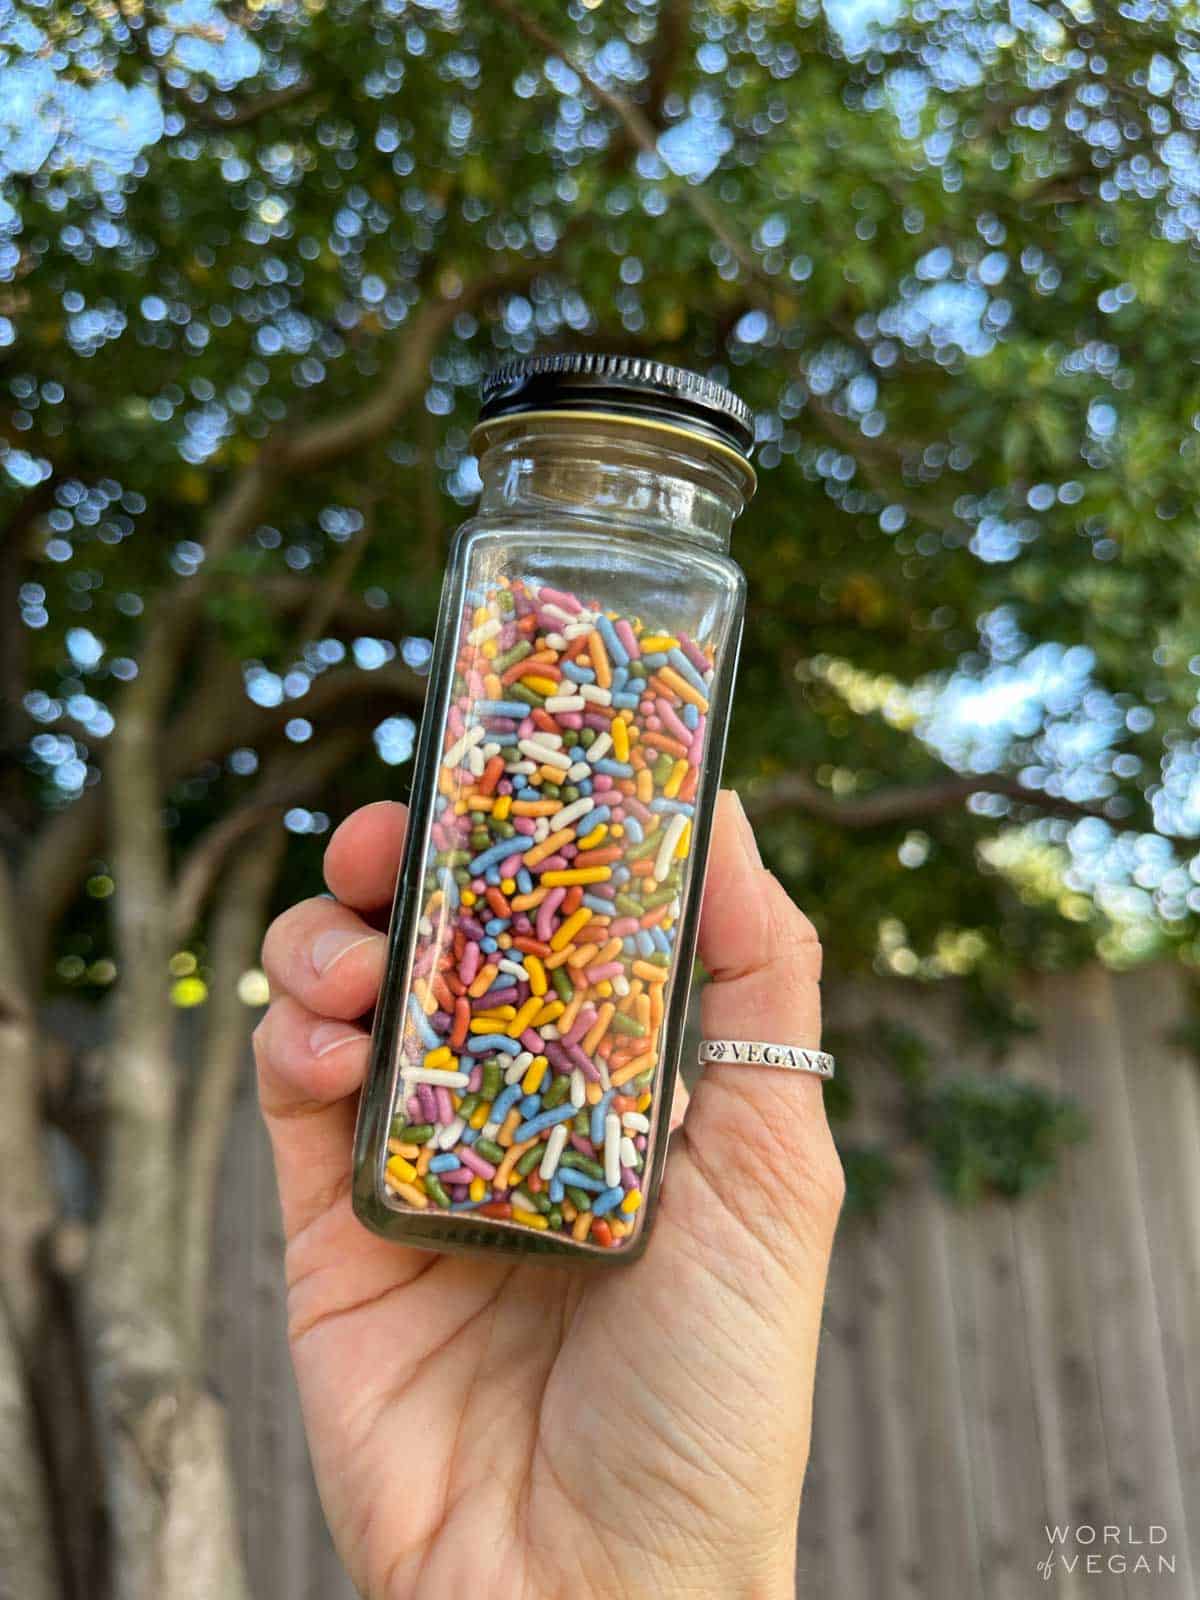 A glass container filled with rainbow vegan sprinkles from the brand Wilton.